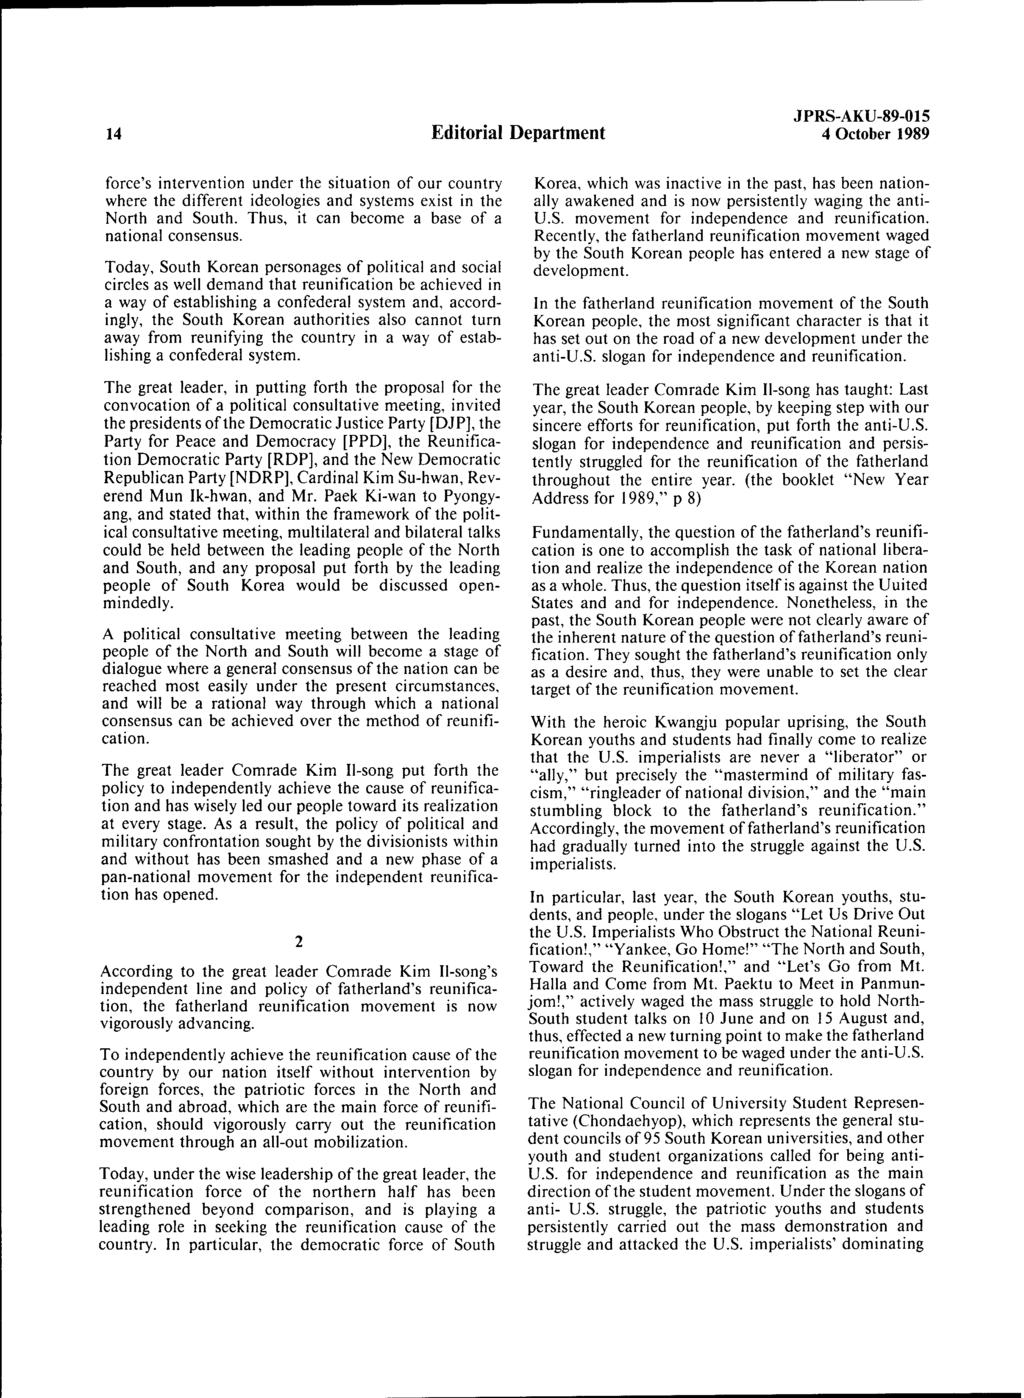 14 Editorial Department JPRS-AKU-89-015 4 October 1989 force's intervention under the situation of our country where the different ideologies and systems exist in the North and South.